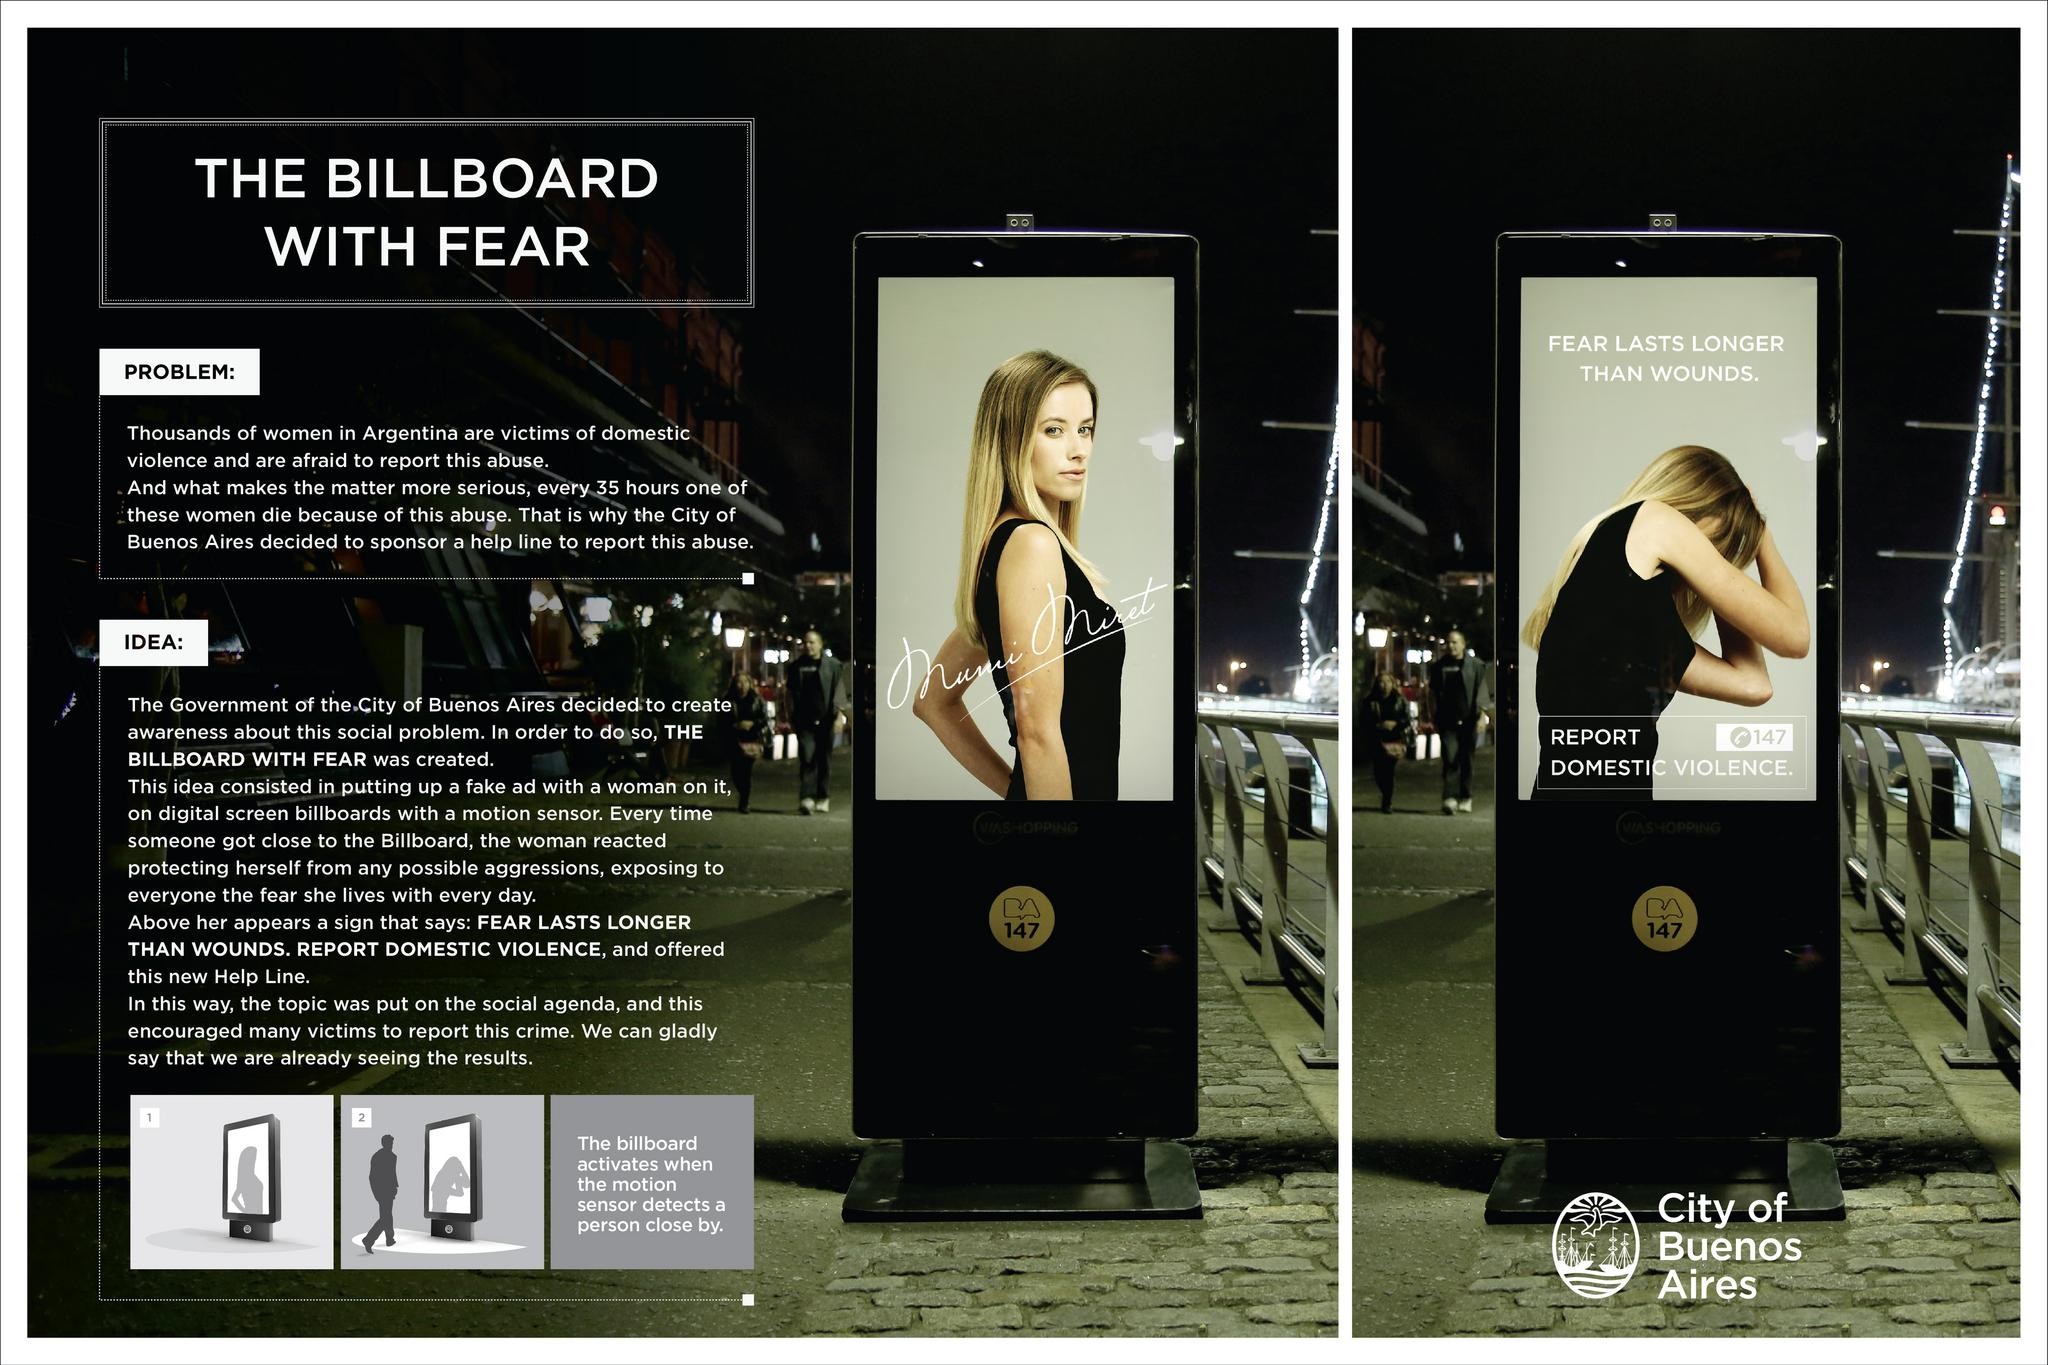 THE BILLBOARD WITH FEAR